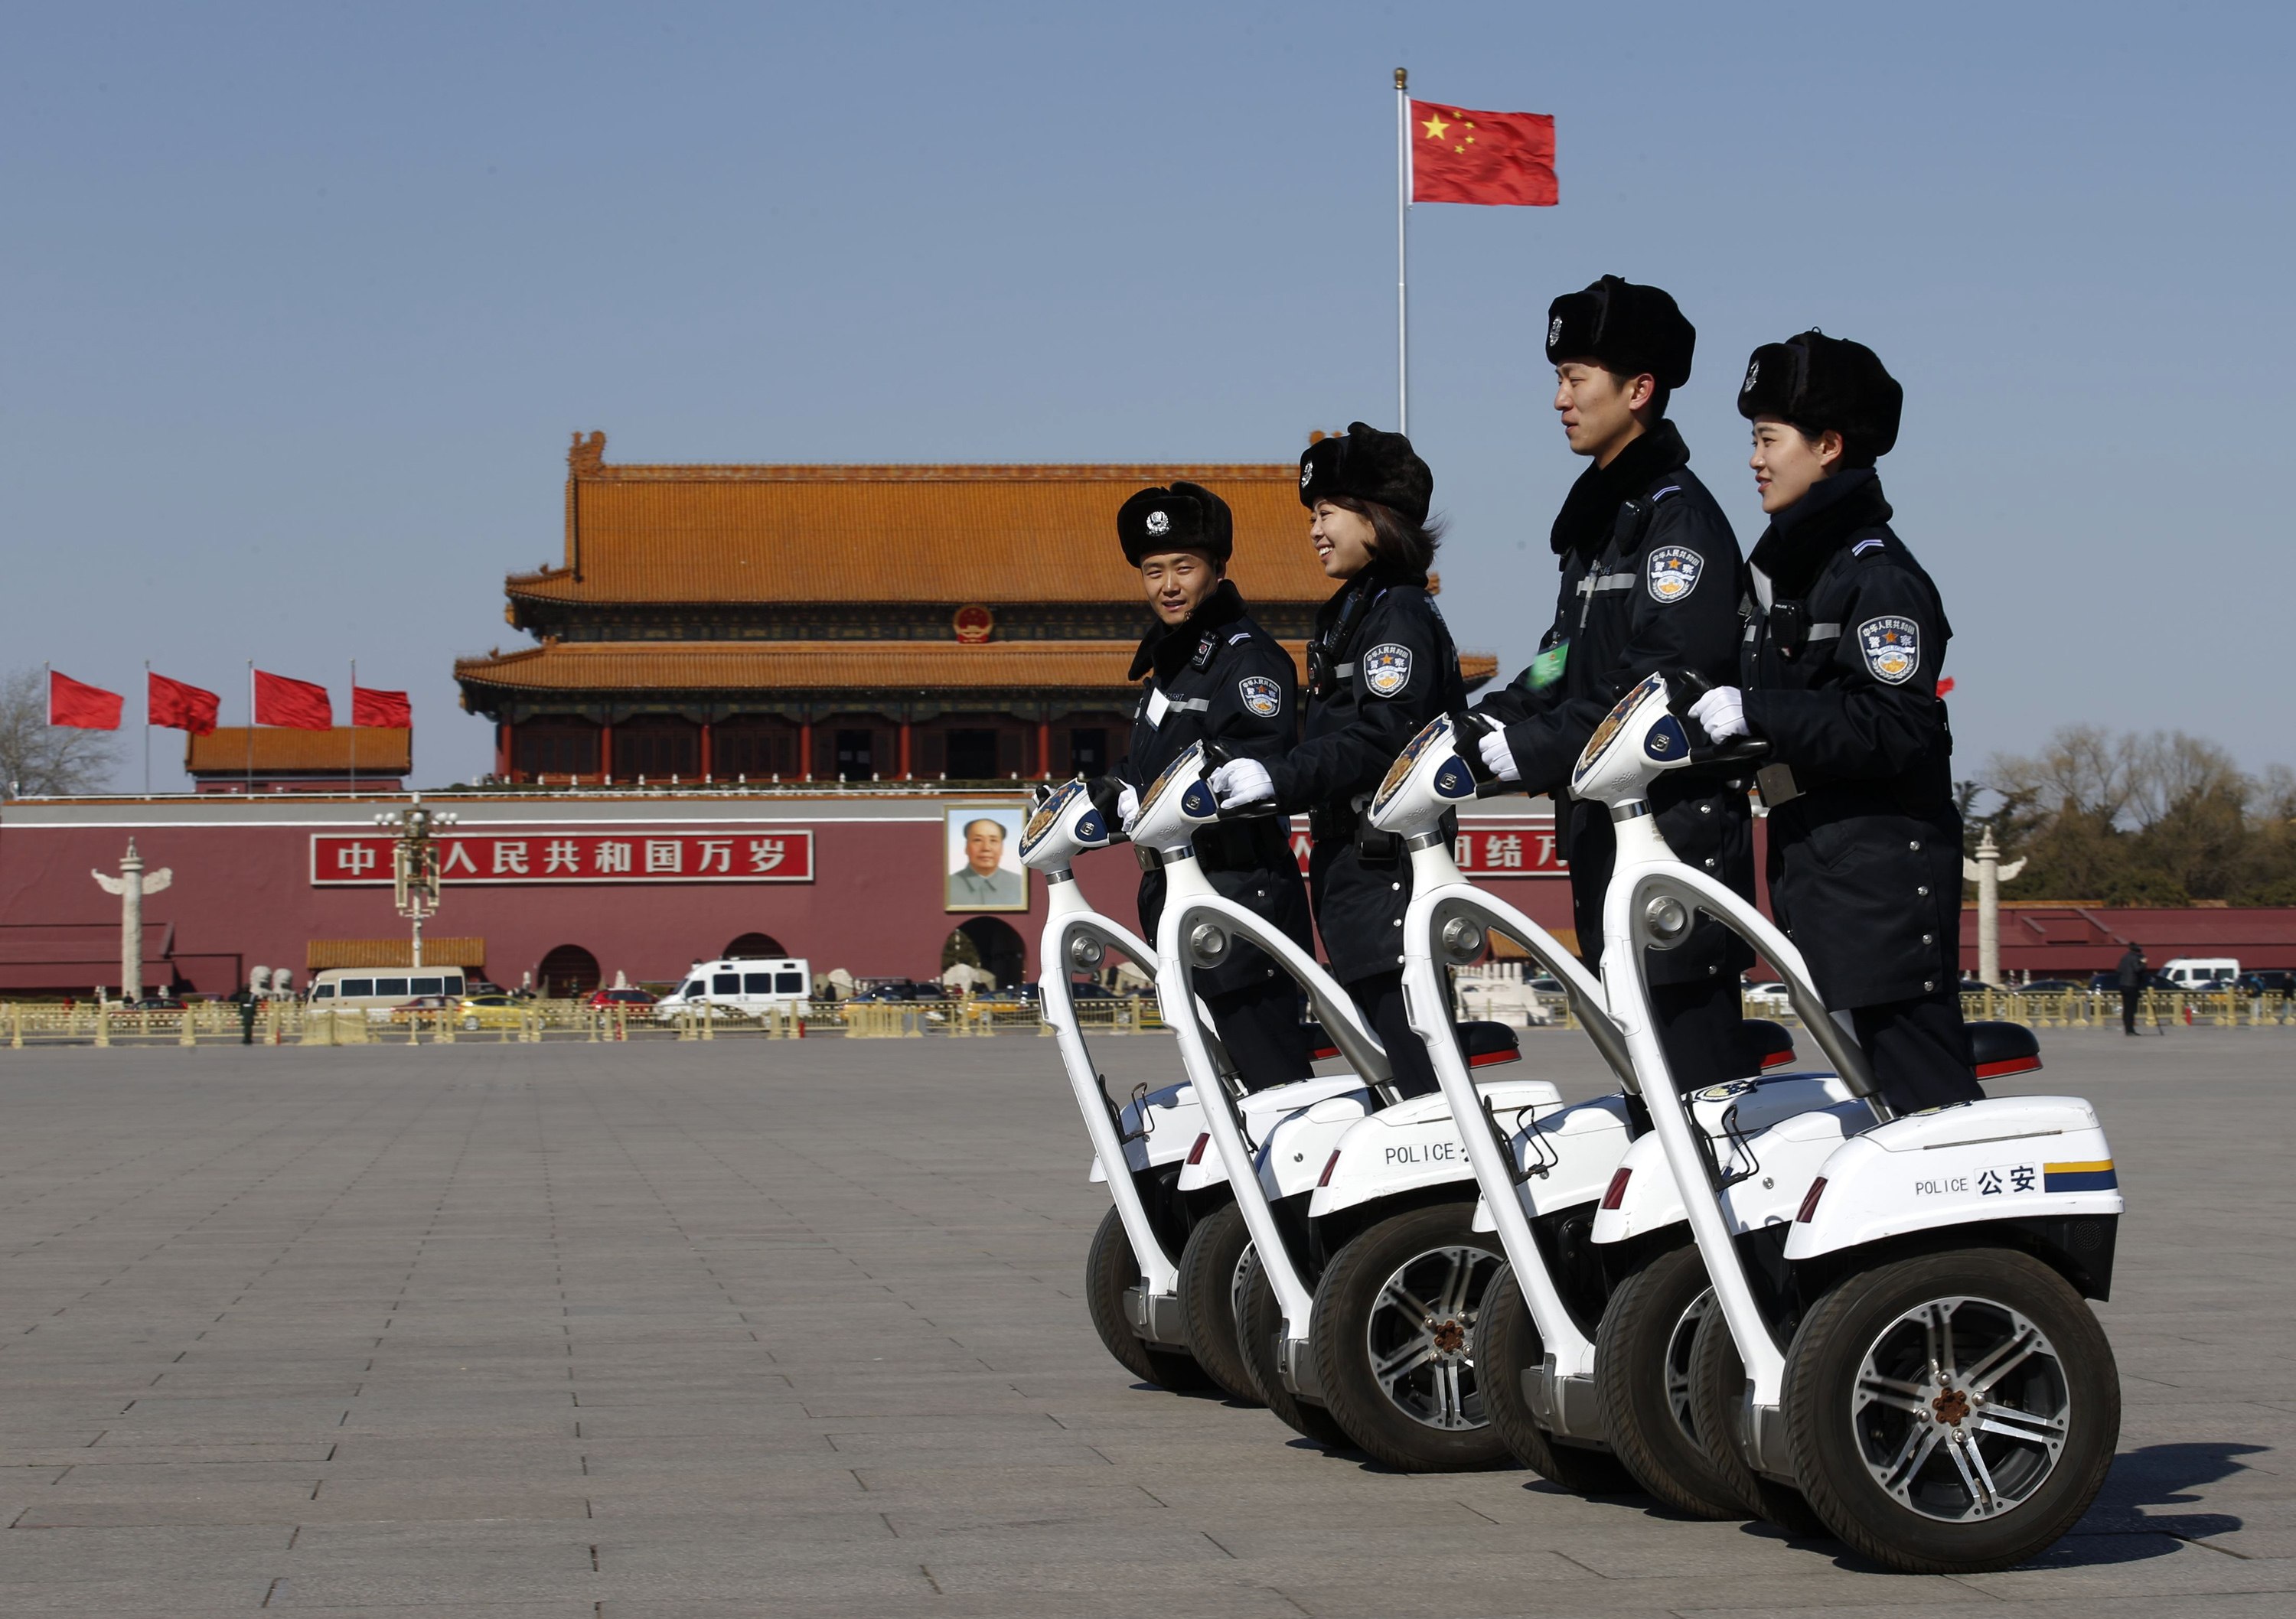 Despite finding some popularity with police forces, including in China, Segway struggled to break into the mass consumer market. Photo: Reuters